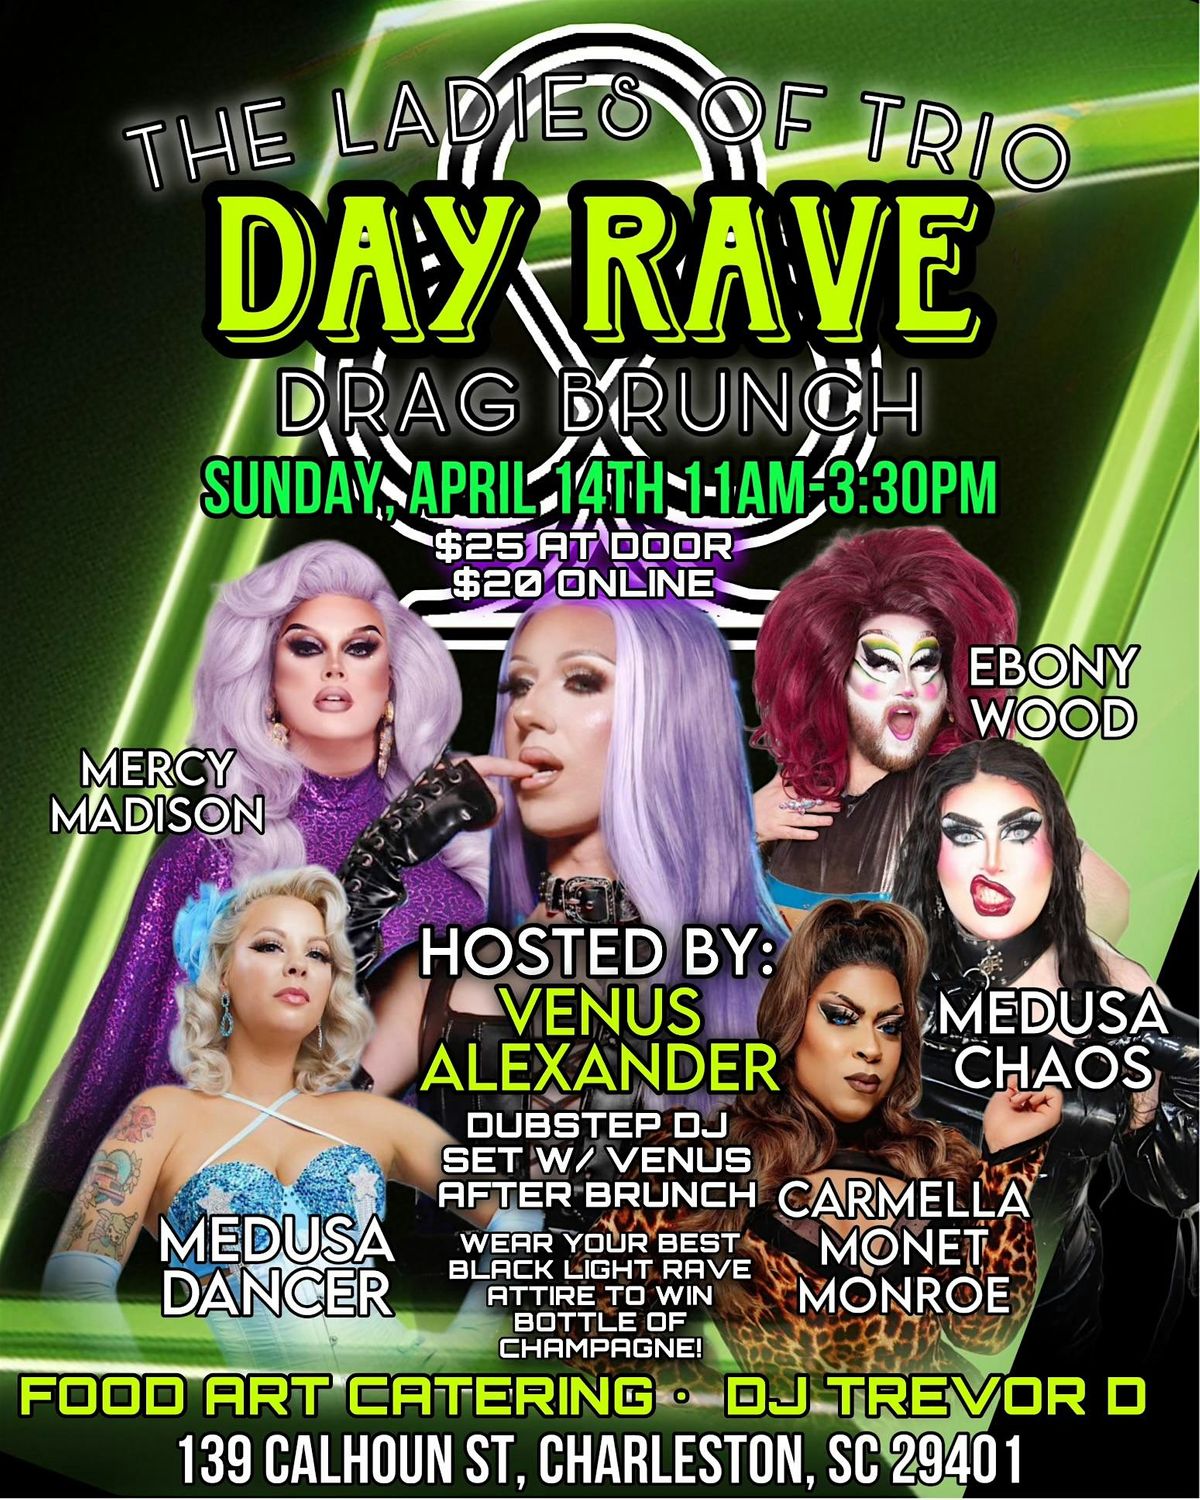 The Ladies of Trio Drag Brunch- Day Rave